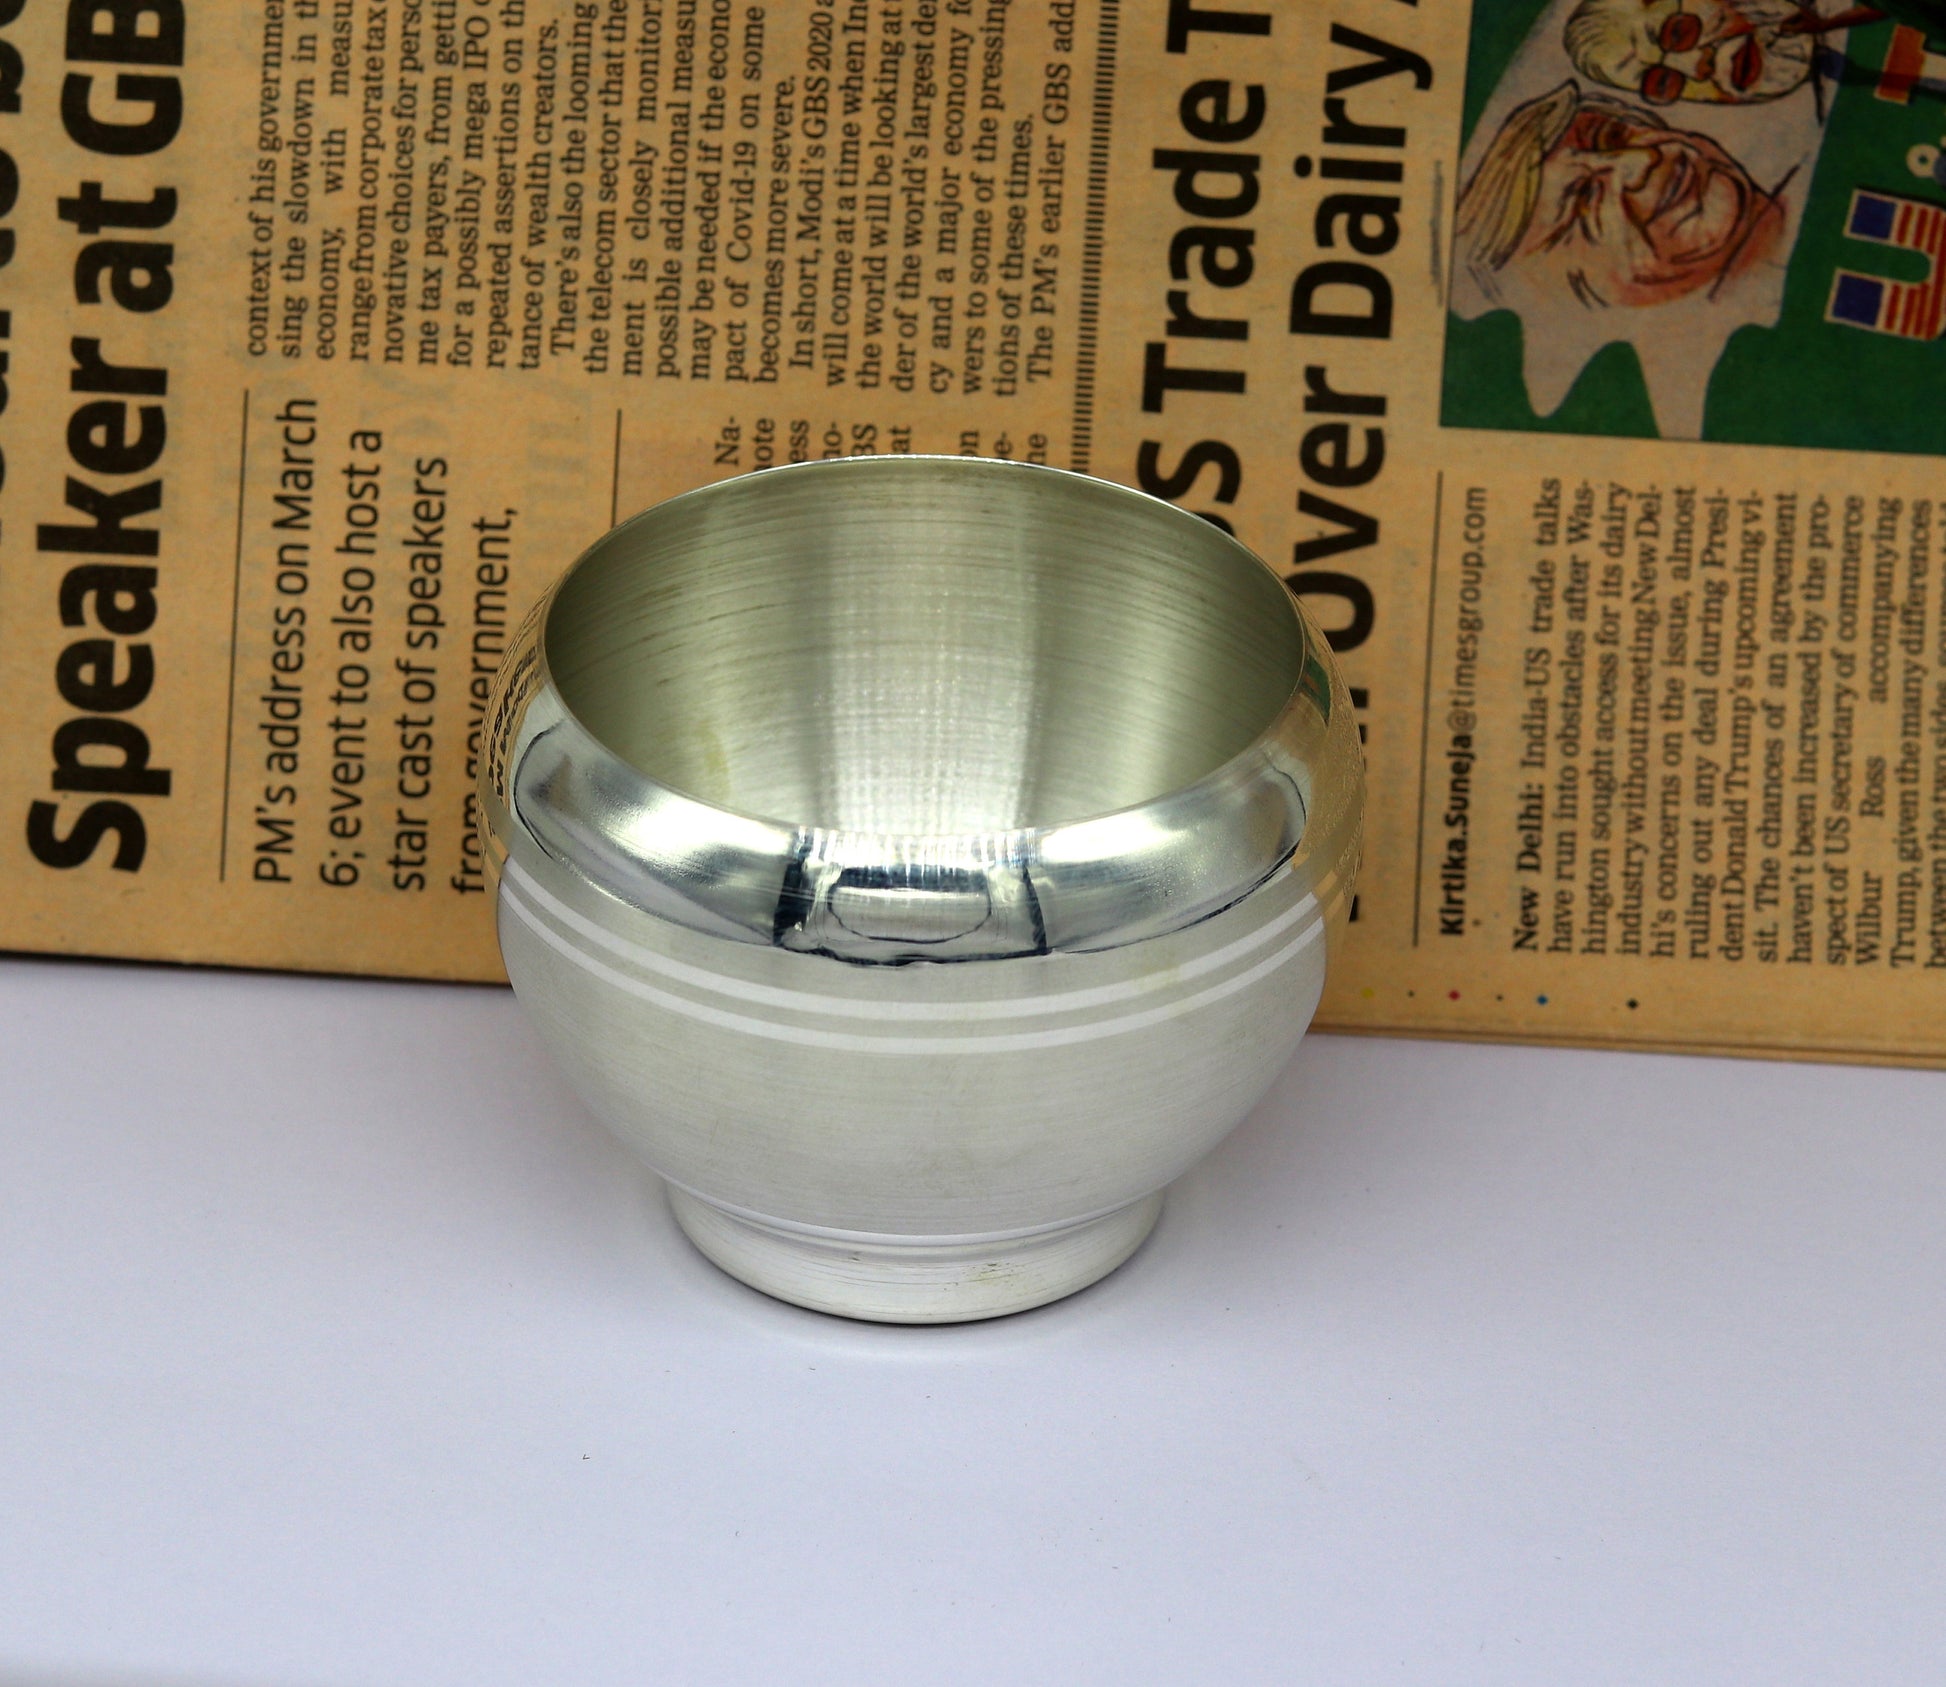 999 pure sterling silver handmade silver puja utensils bowl, silver vessel silver has antibacterial properties, stay healthy family sv95 - TRIBAL ORNAMENTS